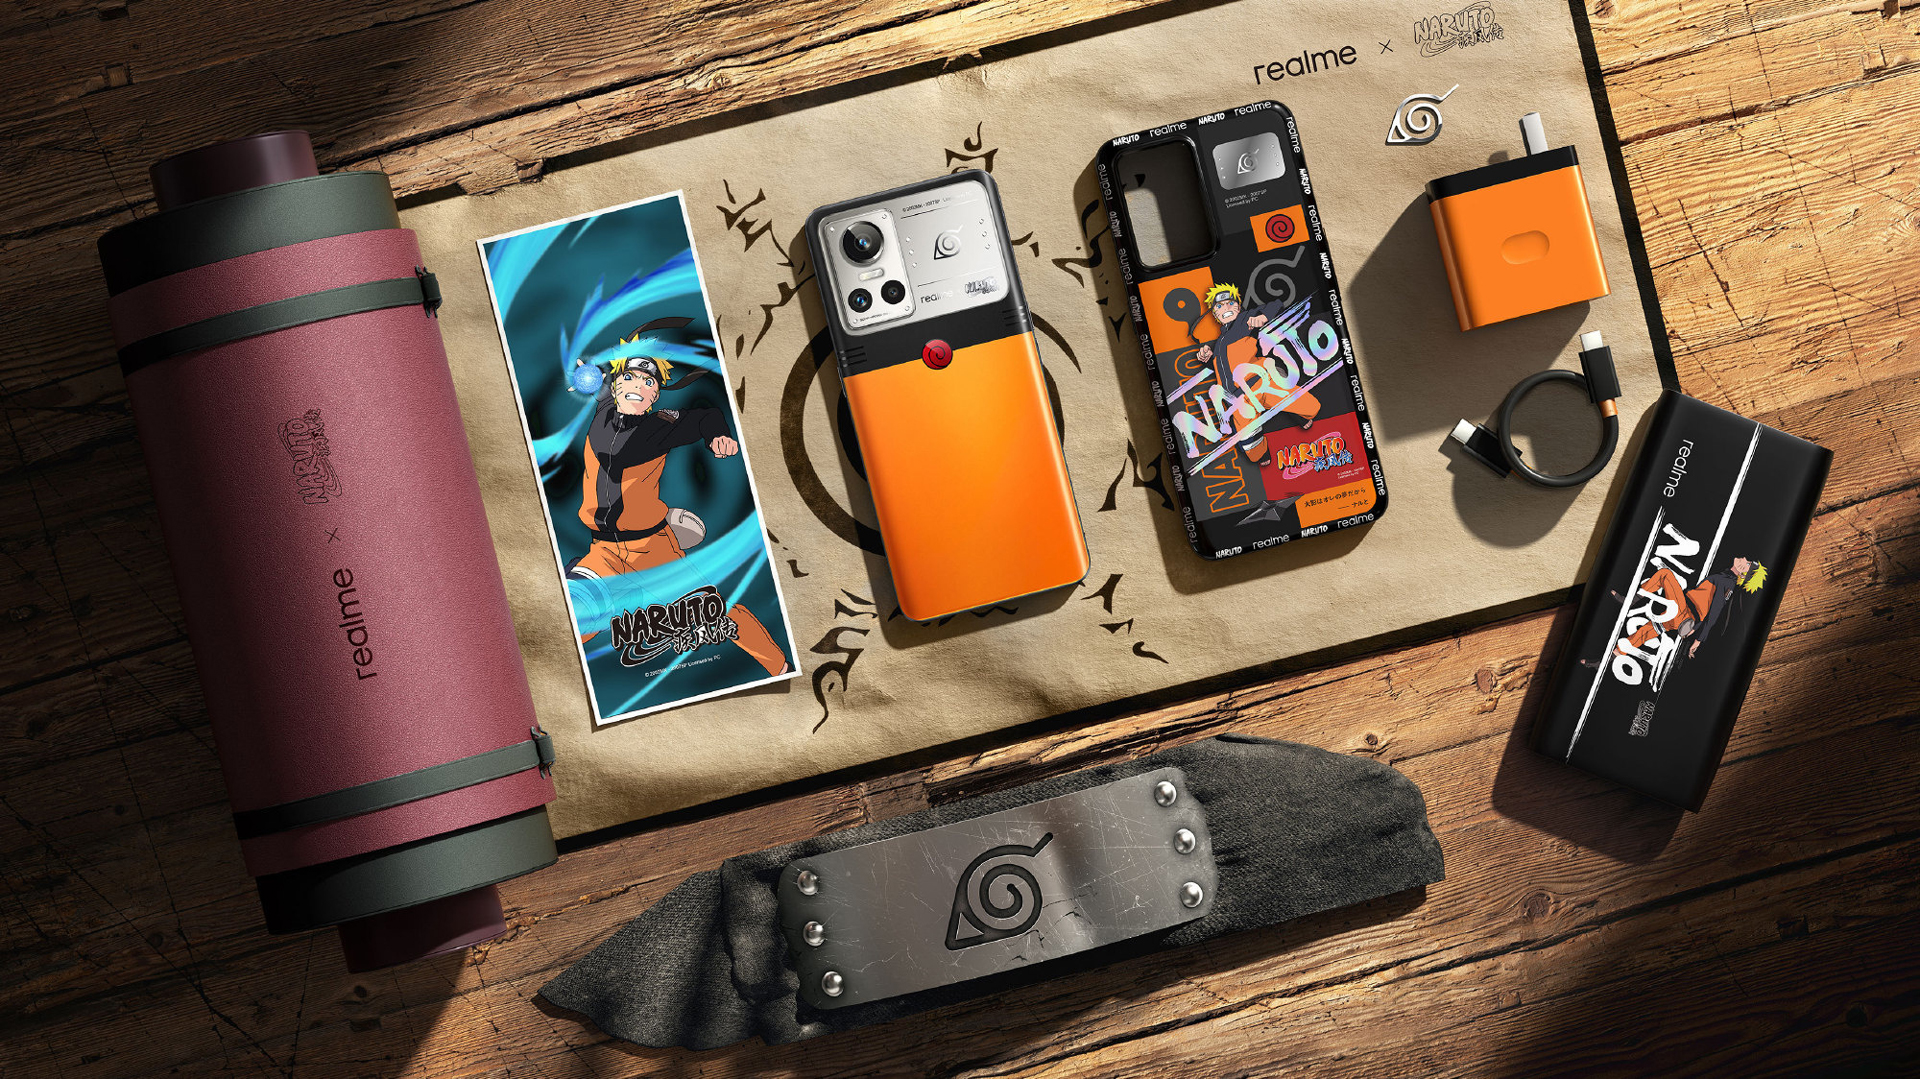 China is getting a Naruto phone, and we want in on the fun, too